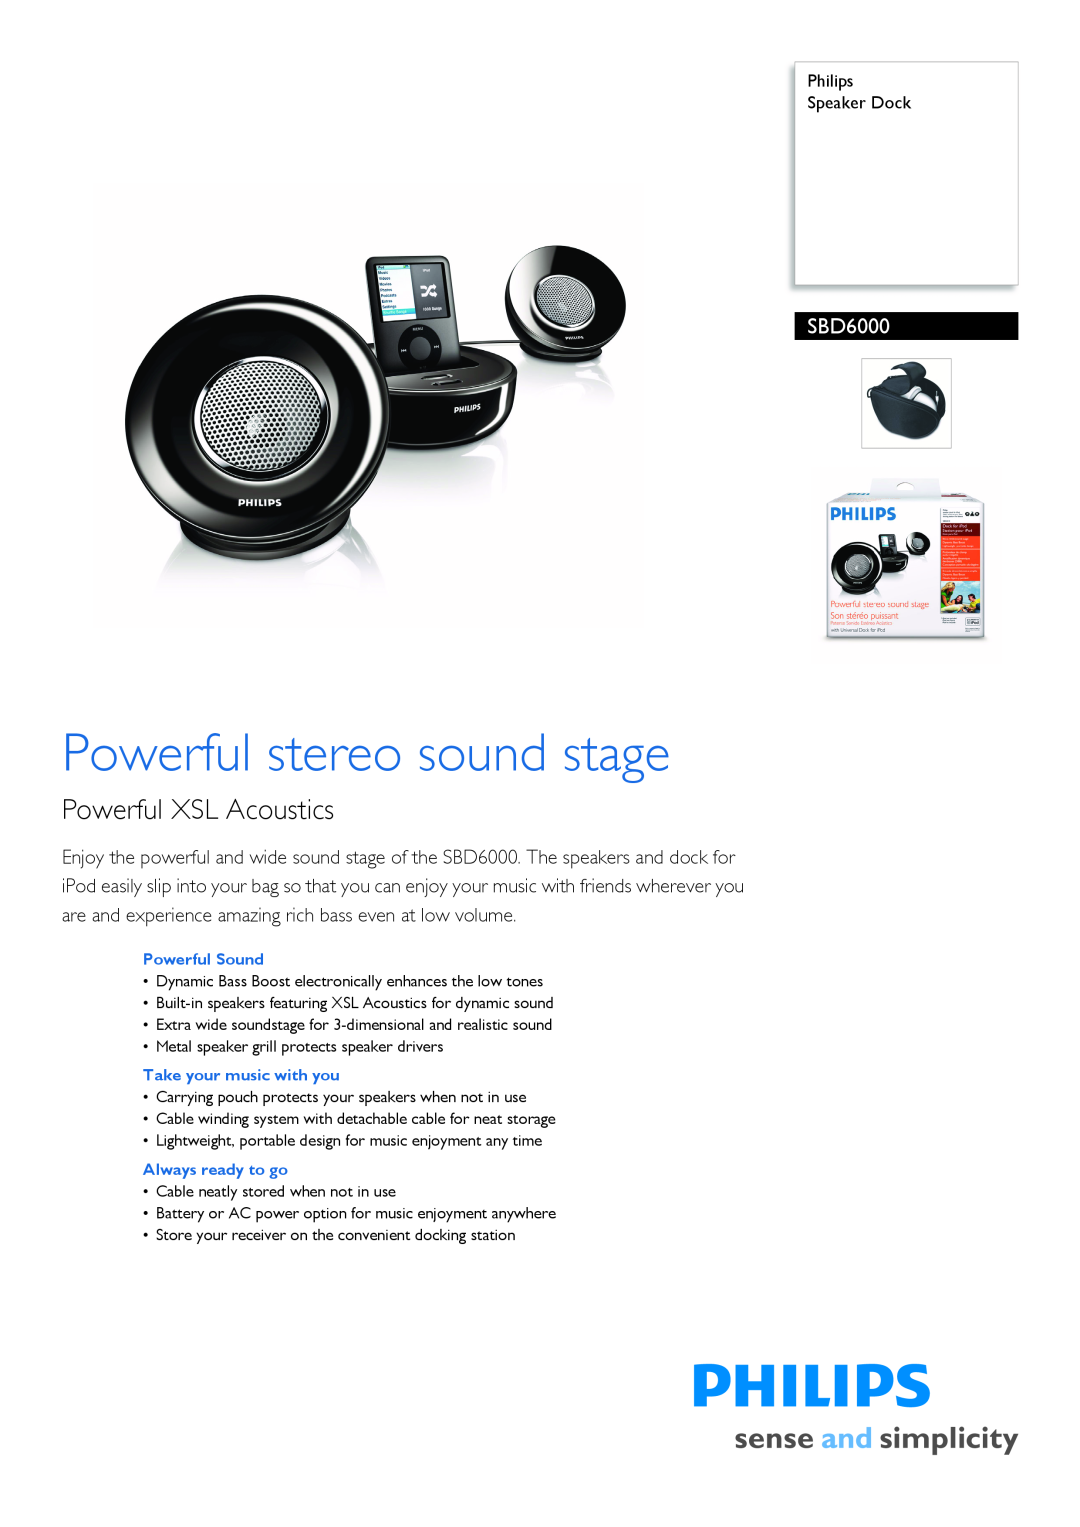 Philips SBD6000 manual Philips Speaker Dock, Powerful stereo sound stage, Powerful XSL Acoustics 